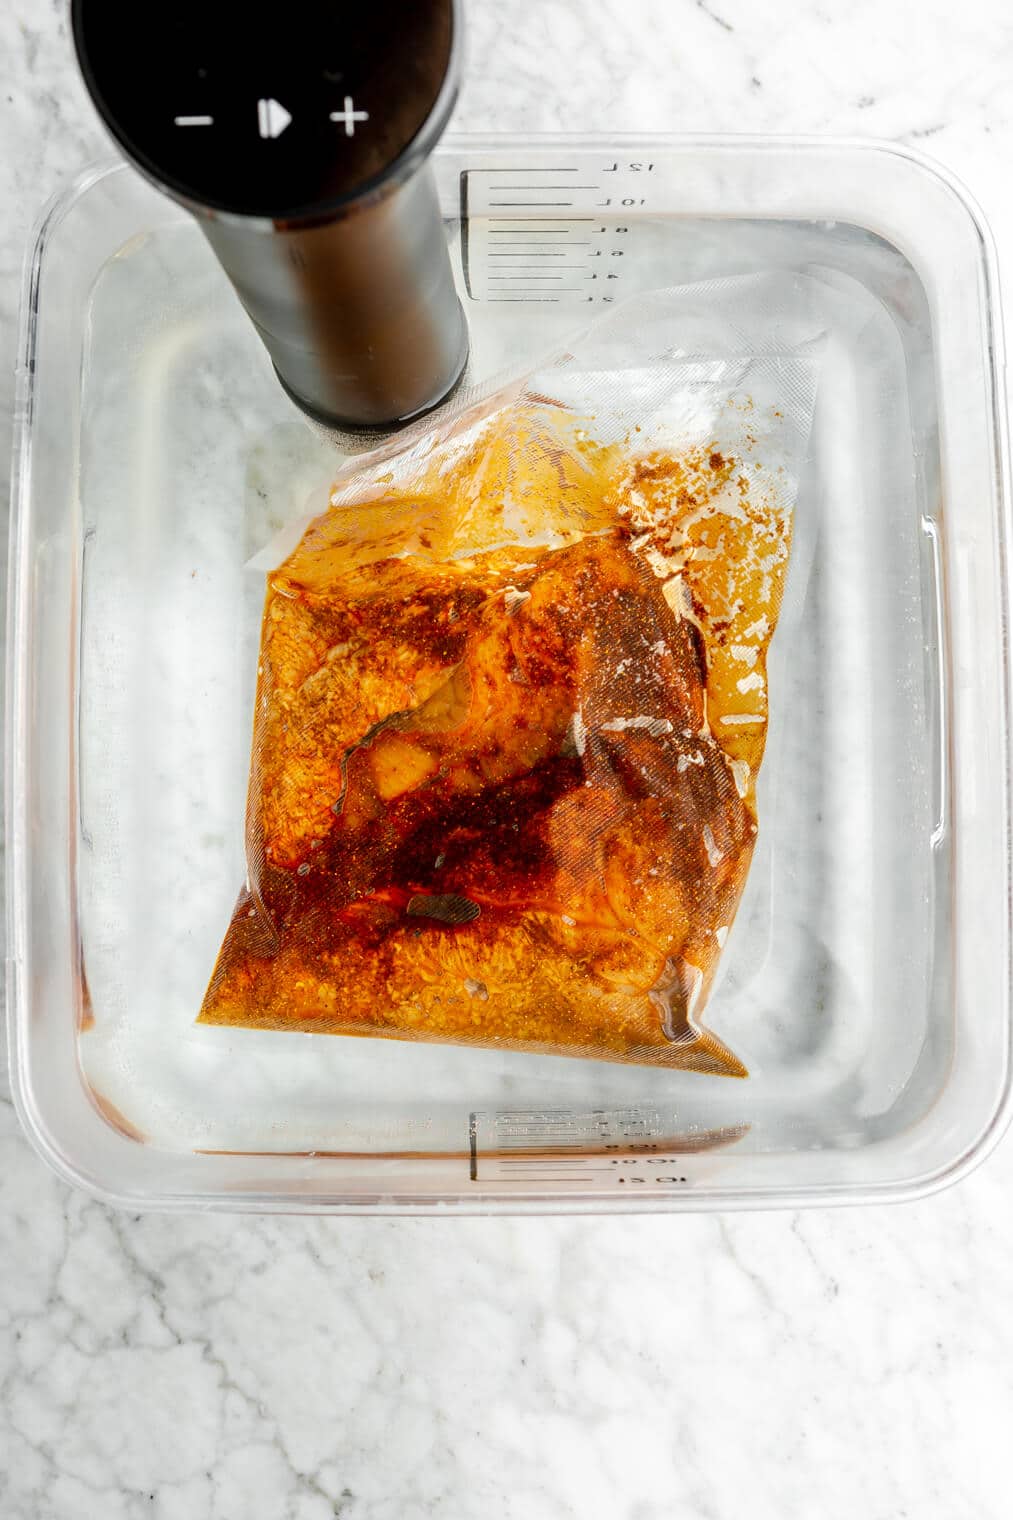 Sous vide chicken submerged in water with a sous vide device.